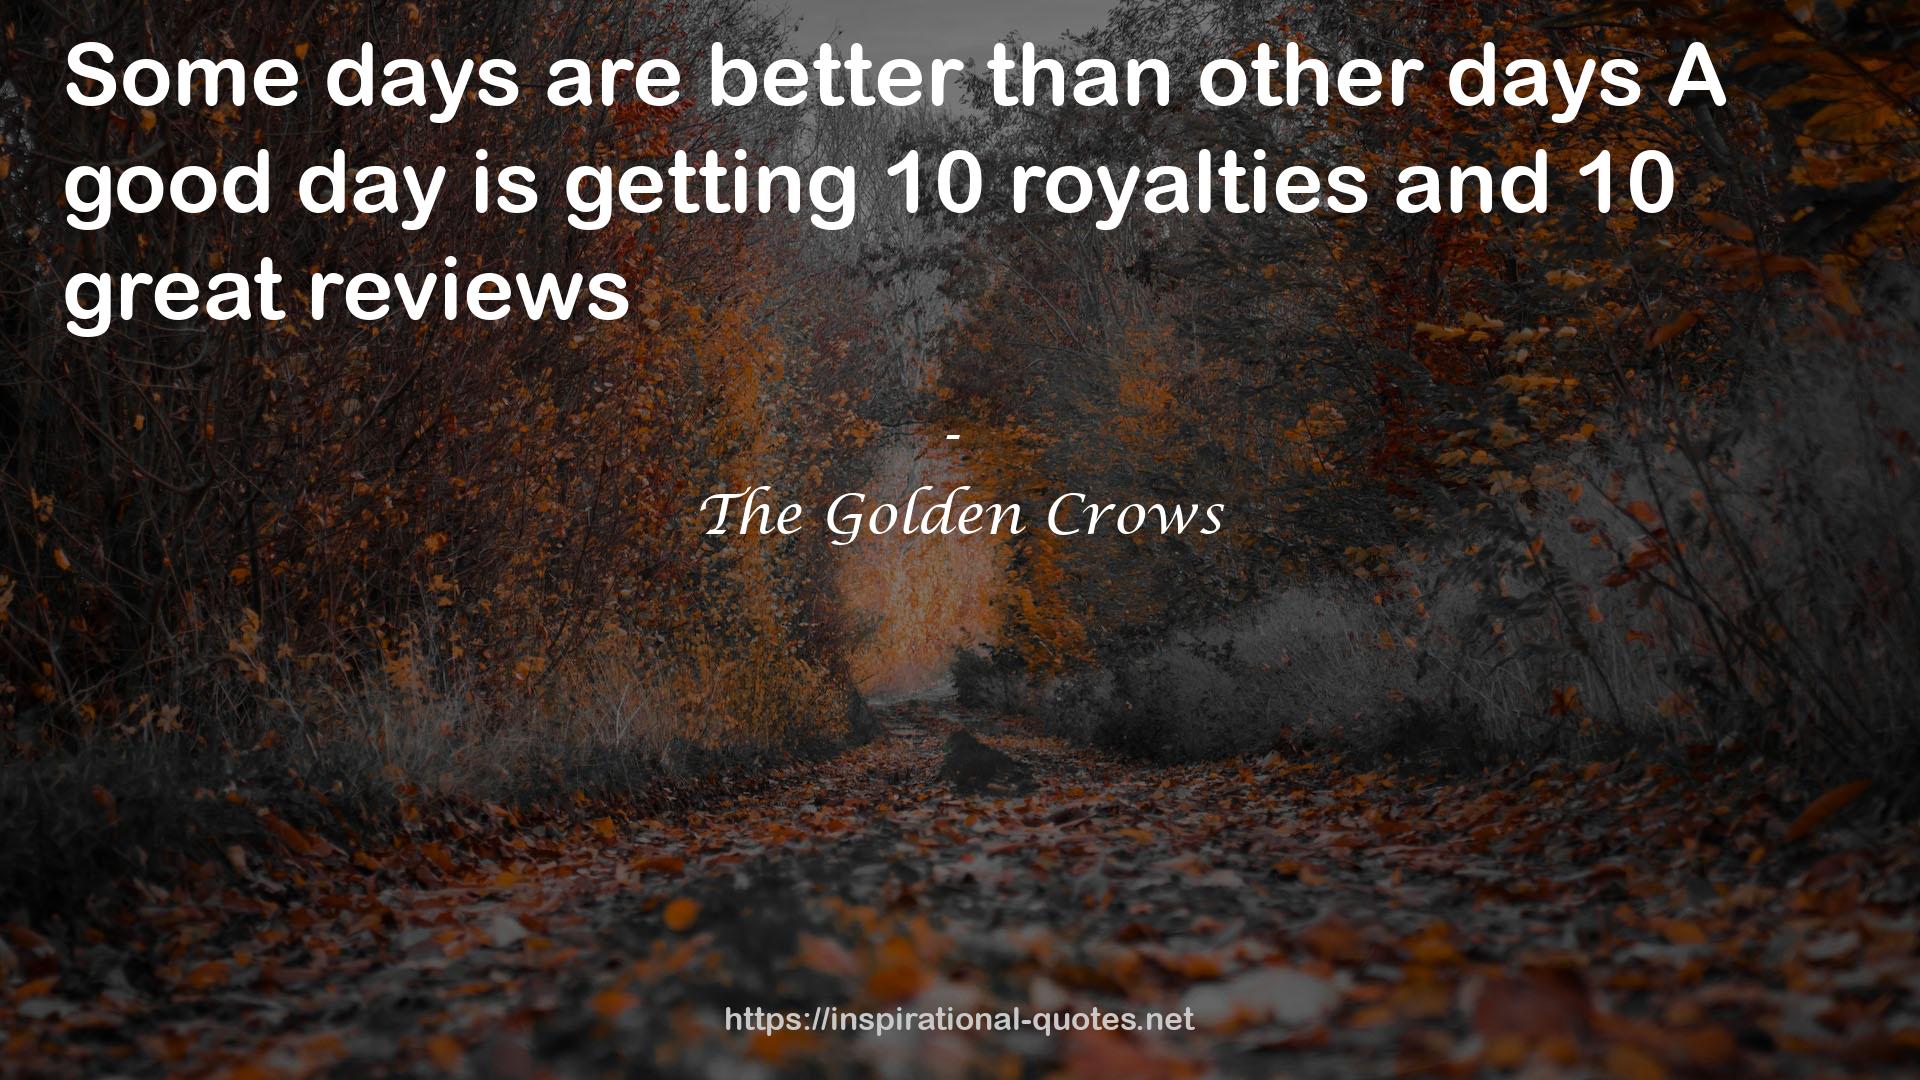 The Golden Crows QUOTES